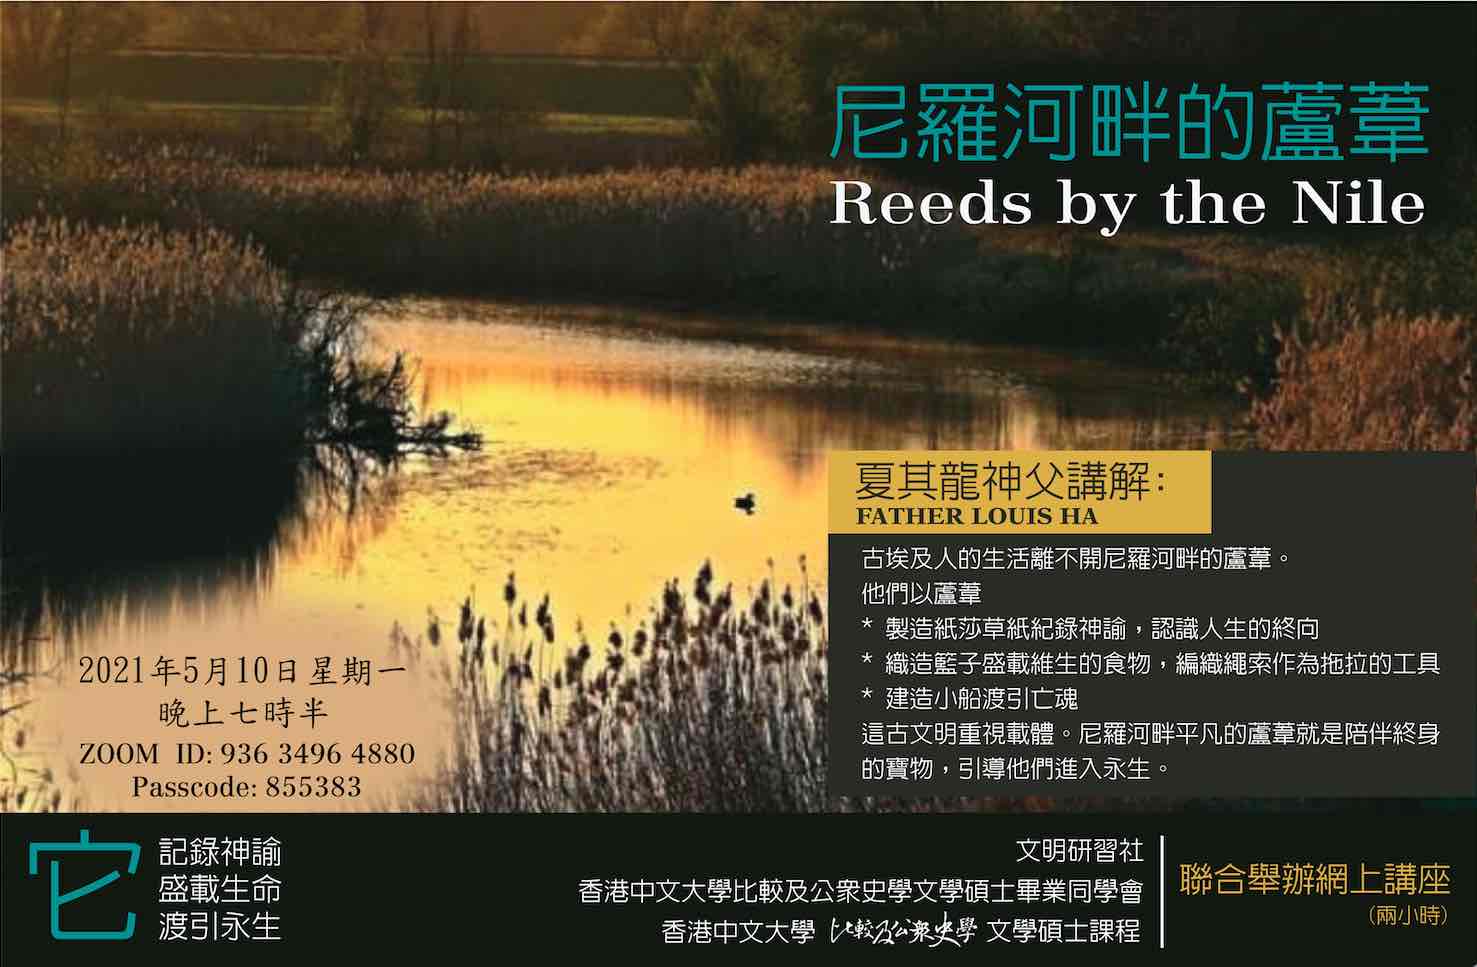 <# Reeds on the Nile #>